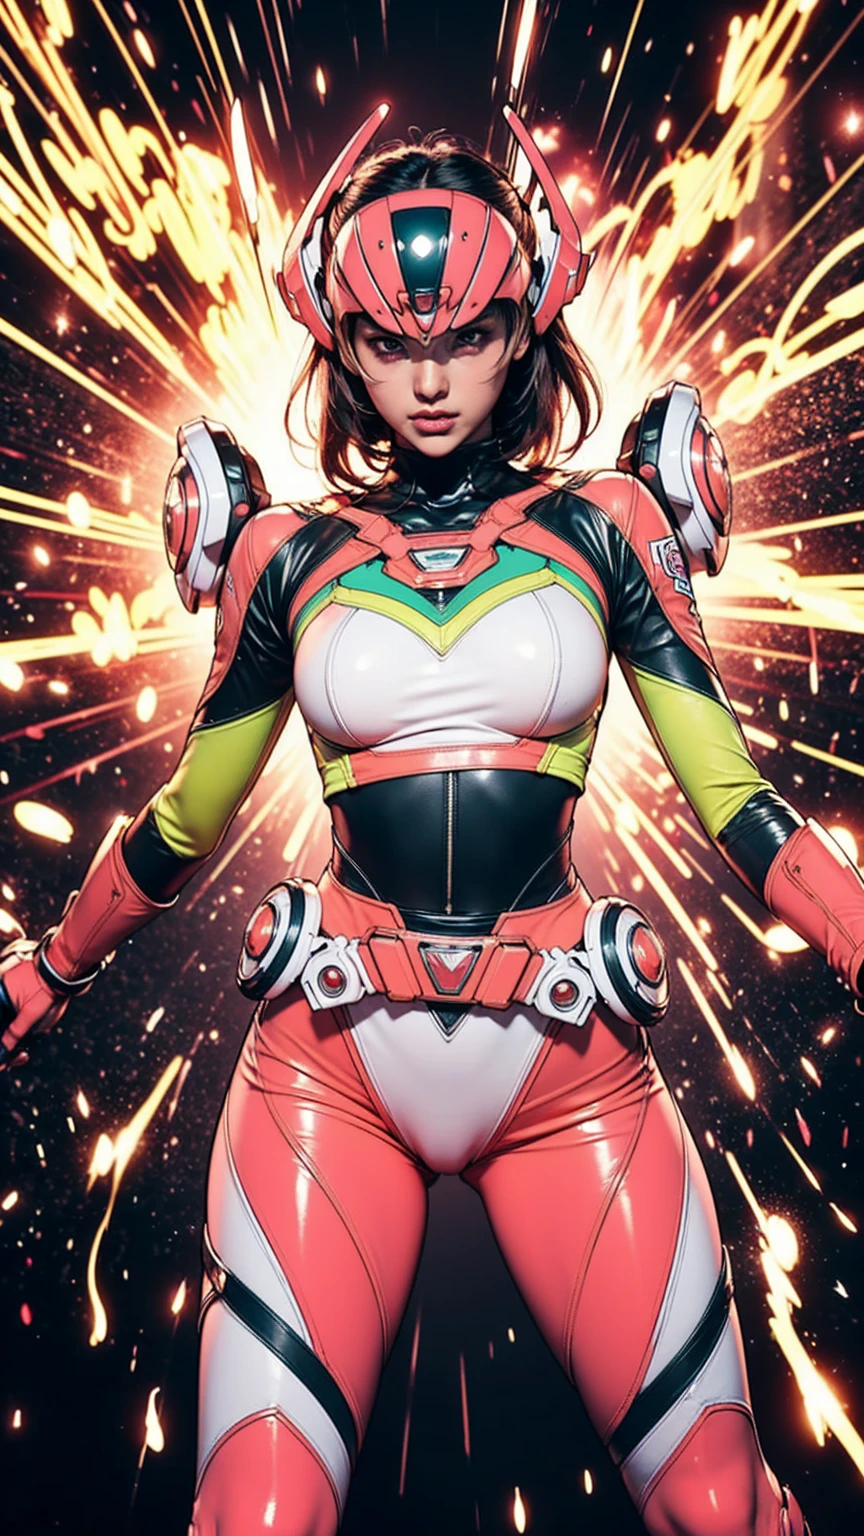 Solo, A brave and courageous image of a 6 member ranger team, Each one is decorated in vibrant colors such as:: ((Pink)), red is front of center, violet, Green, yellow, blue black, white,. Dynamic poses in a background that exudes energy and courage, neon, fire, plasma, Fluorescent, shocking, pink big bomber, splashing pink, running, fighting pose, action pose, Embodying the essence of the classic Sentai superhero team. Each Ranger:: The attire is sophisticated and modern, Each color has elements that reflect its theme., Ready for action. ((Camel Toe)), weapons, in sunset background , in cinematic lighting, cover art mixed cinema poster style,